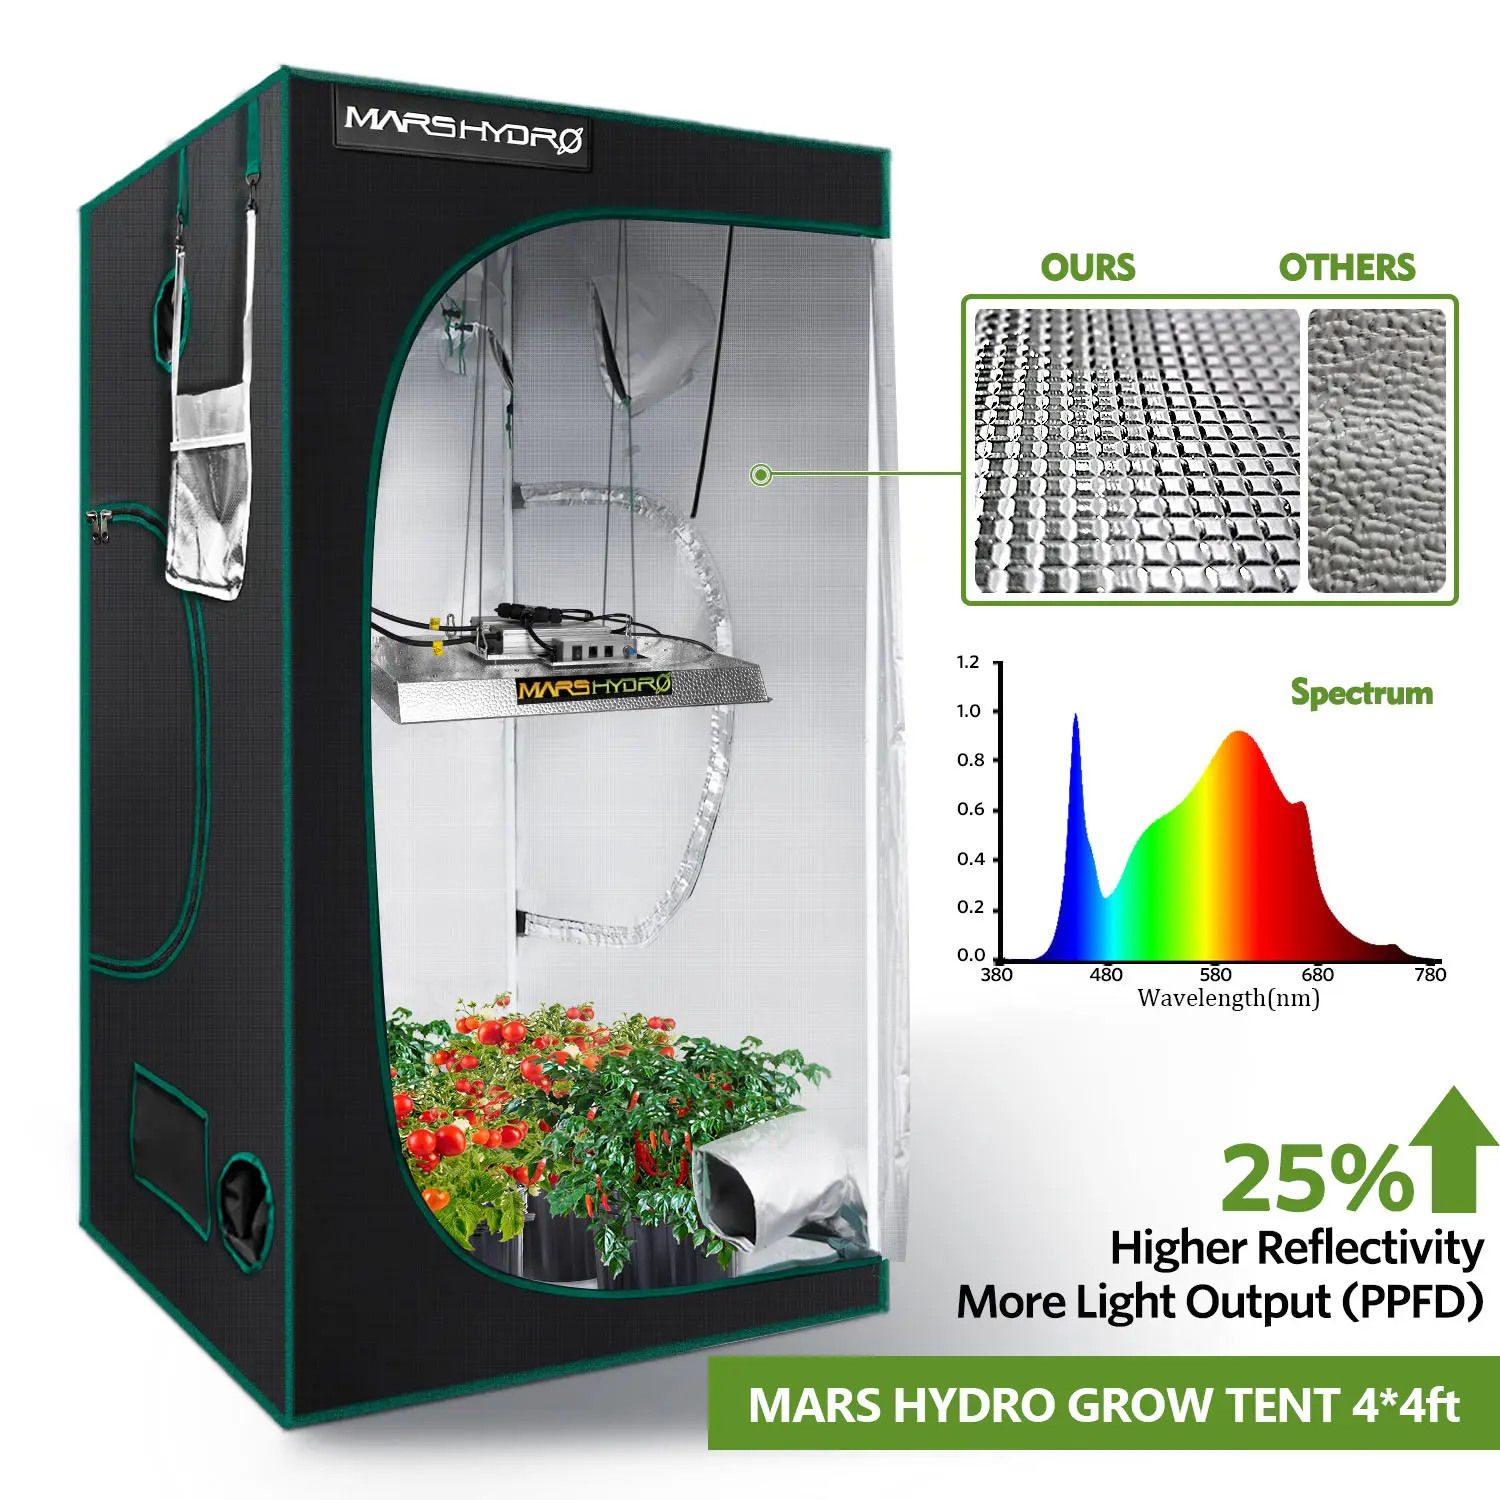 
Mars Hydro TSW 2000 led grow light large 4x4 Grow Tent Box Complete Full Kit With Fan 